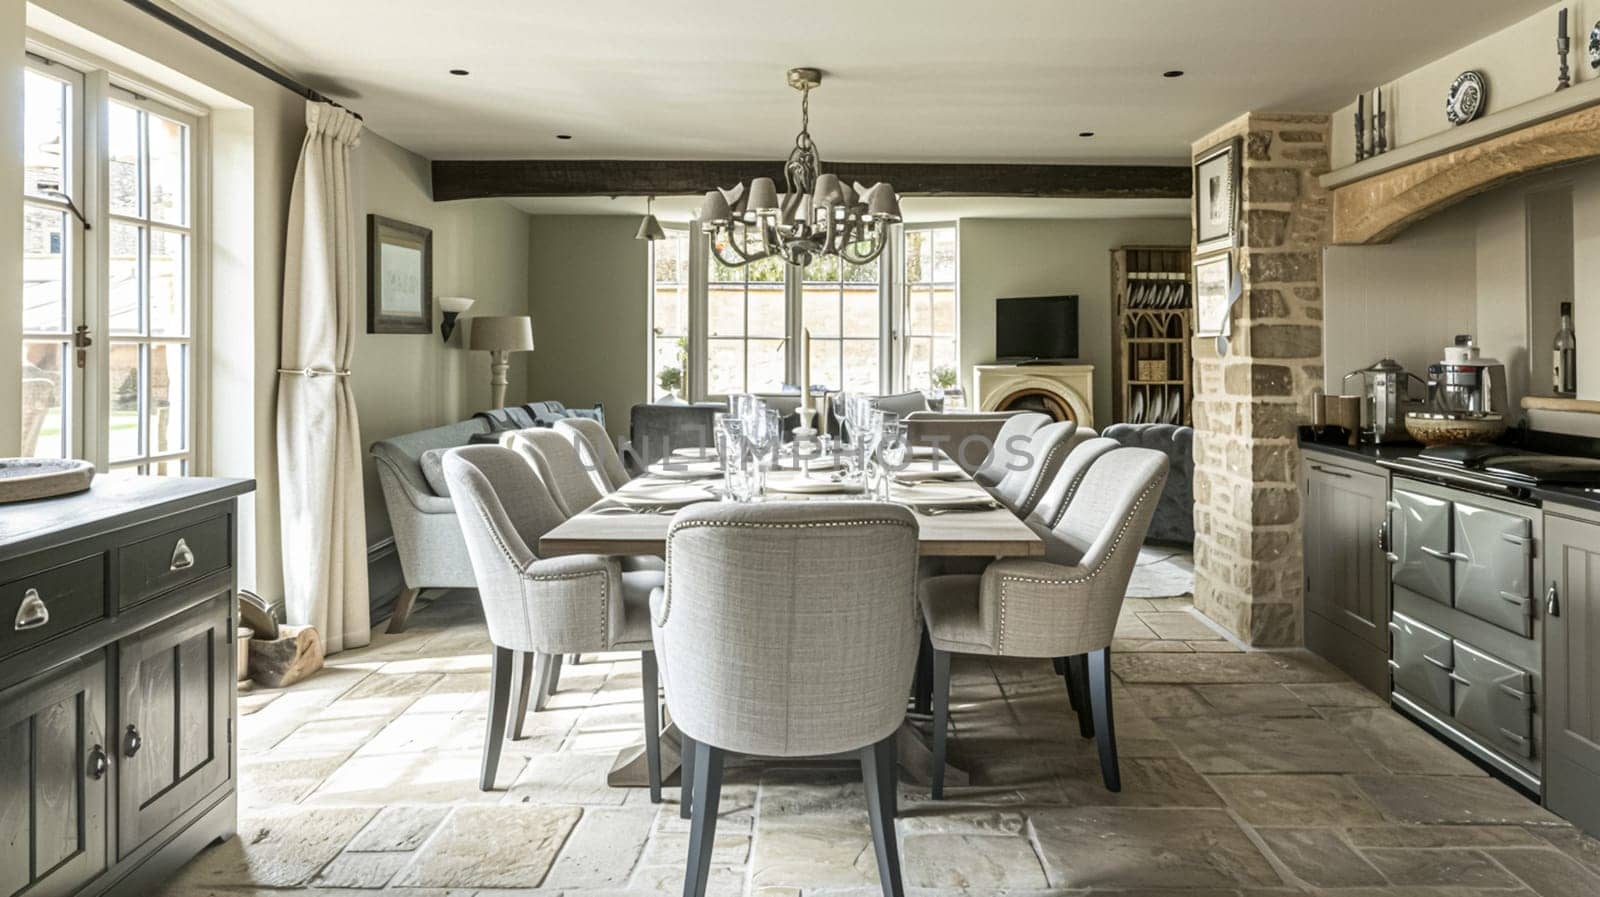 Cotswolds cottage style dining room decor, interior design and country house furniture, home decor, table and chairs, English countryside styling by Anneleven